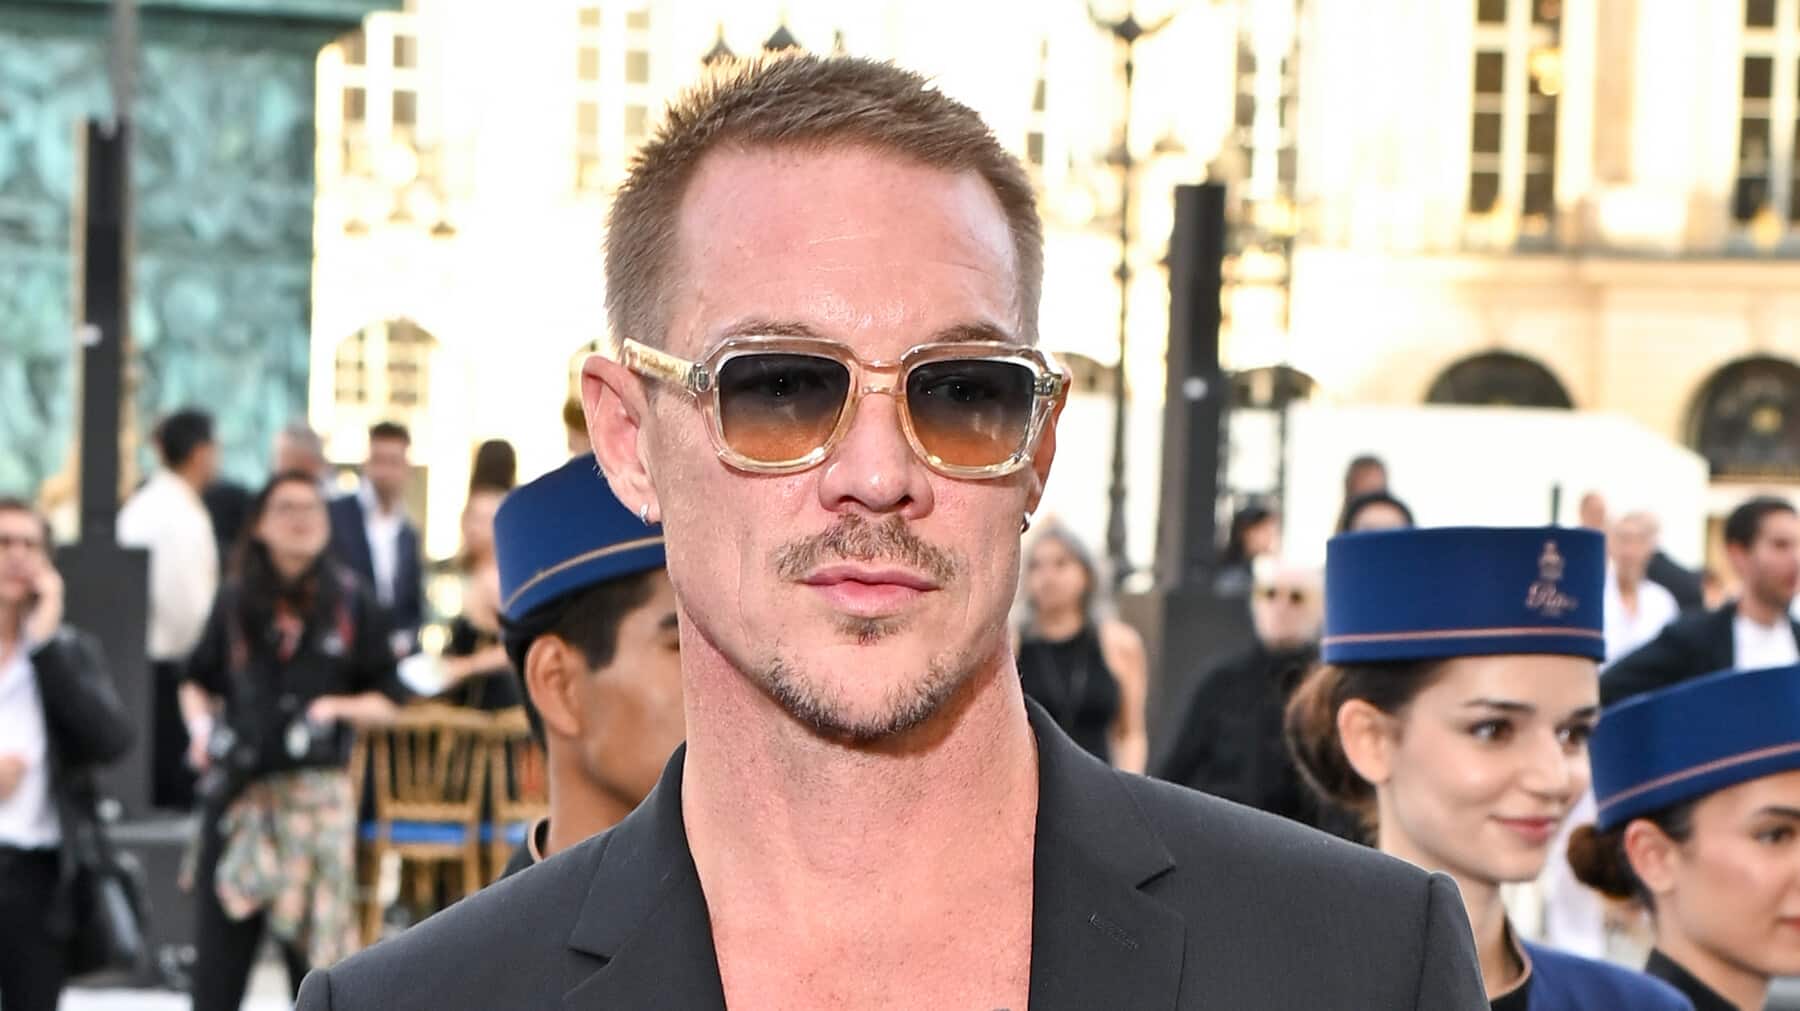 Woman files lawsuit against Diplo for allegedly distributing revenge porn